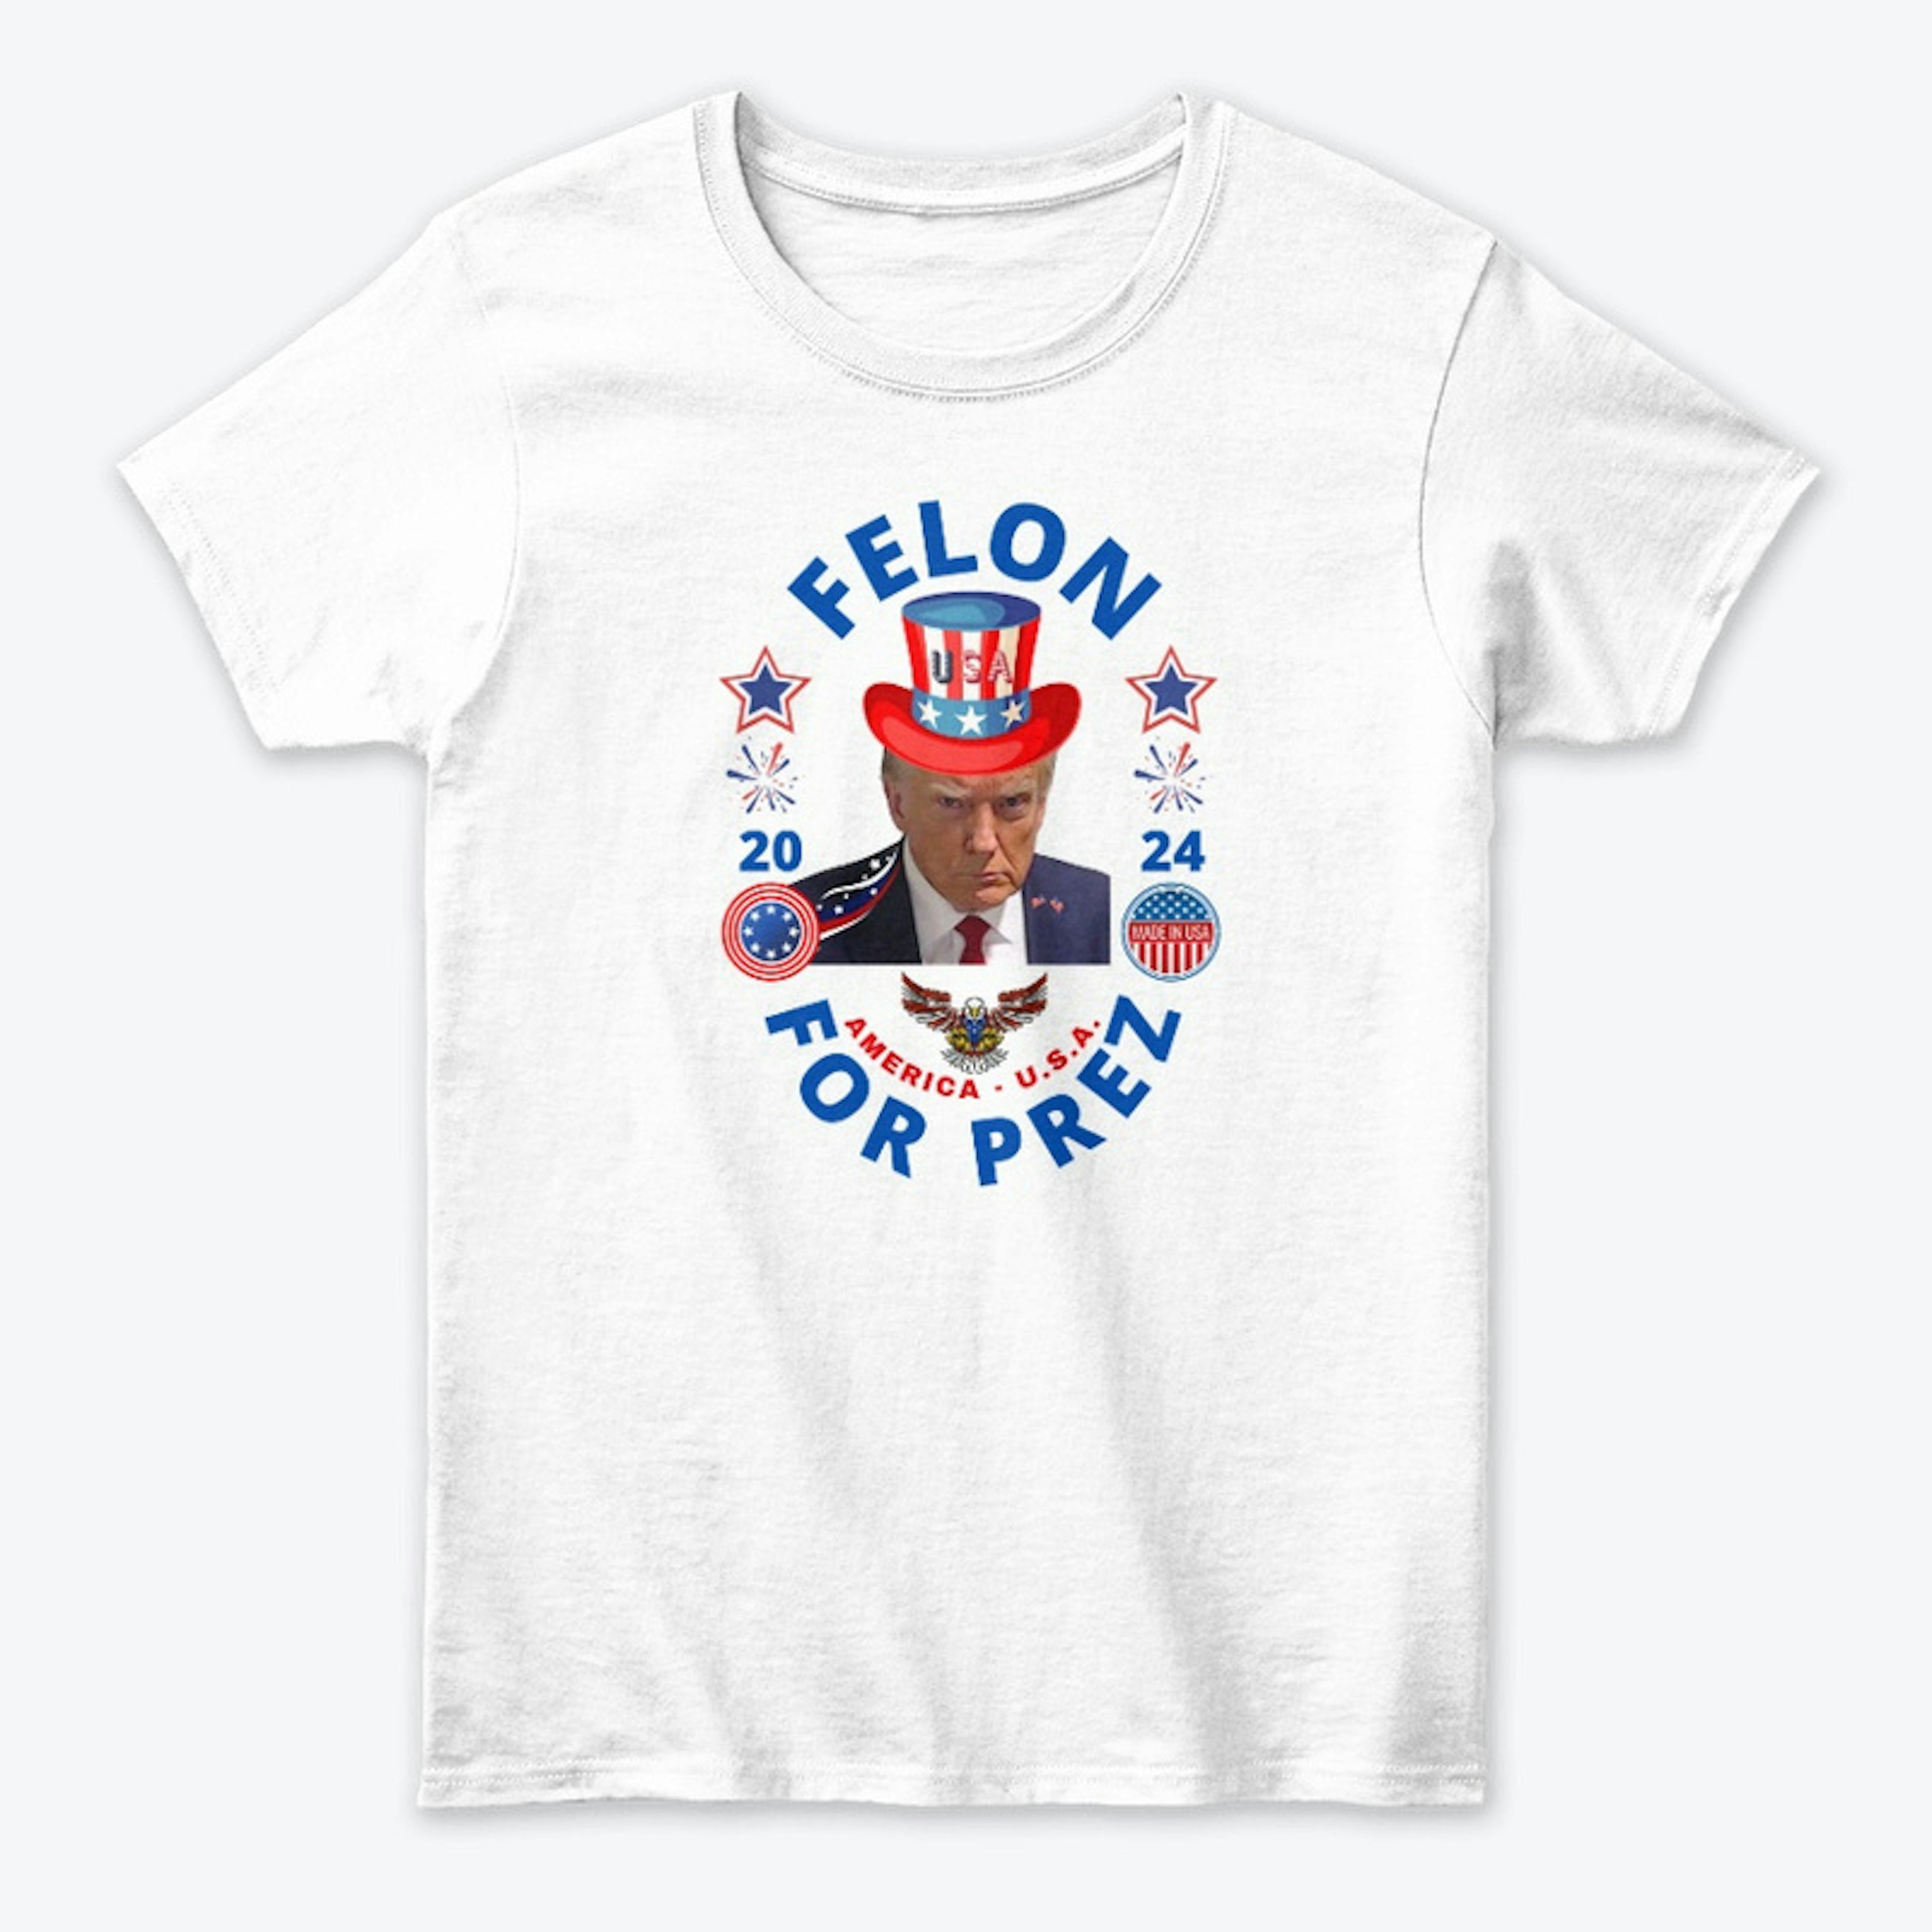 FELON FOR PREZ w/ What Difference (Back)